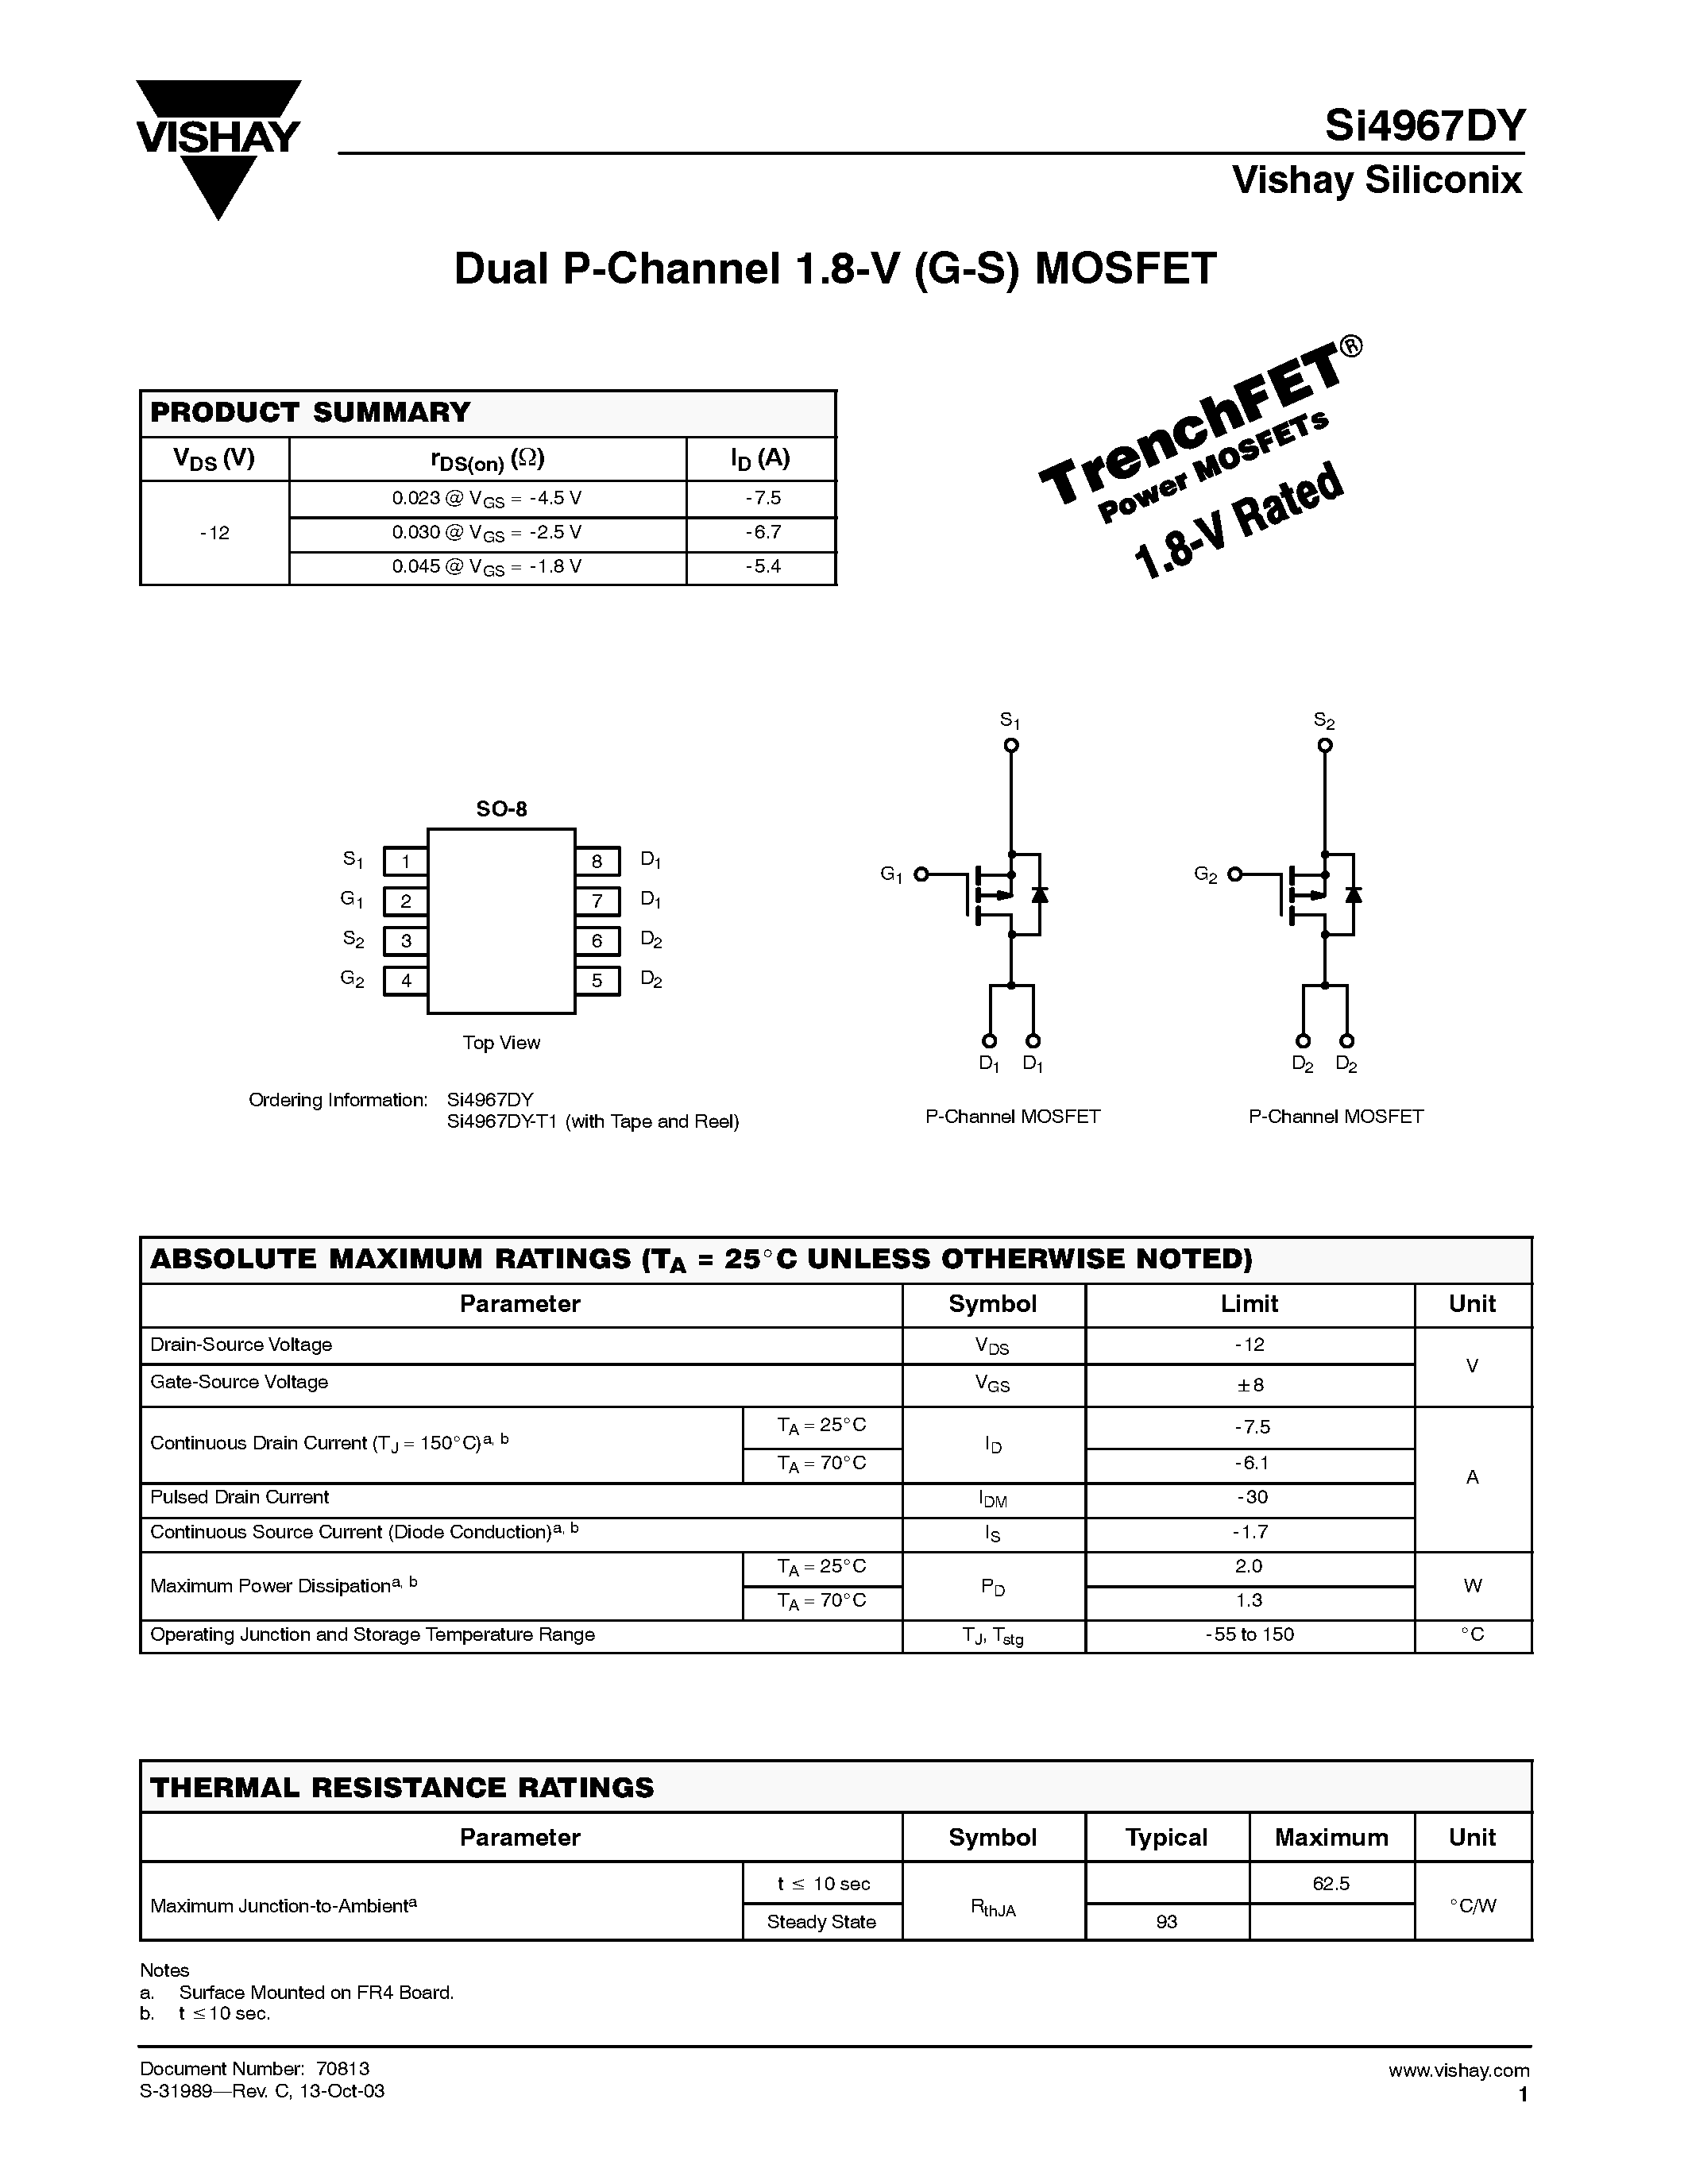 Даташит SI4967DY-T1 - Dual P-Channel 1.8-V (G-S) MOSFET страница 1